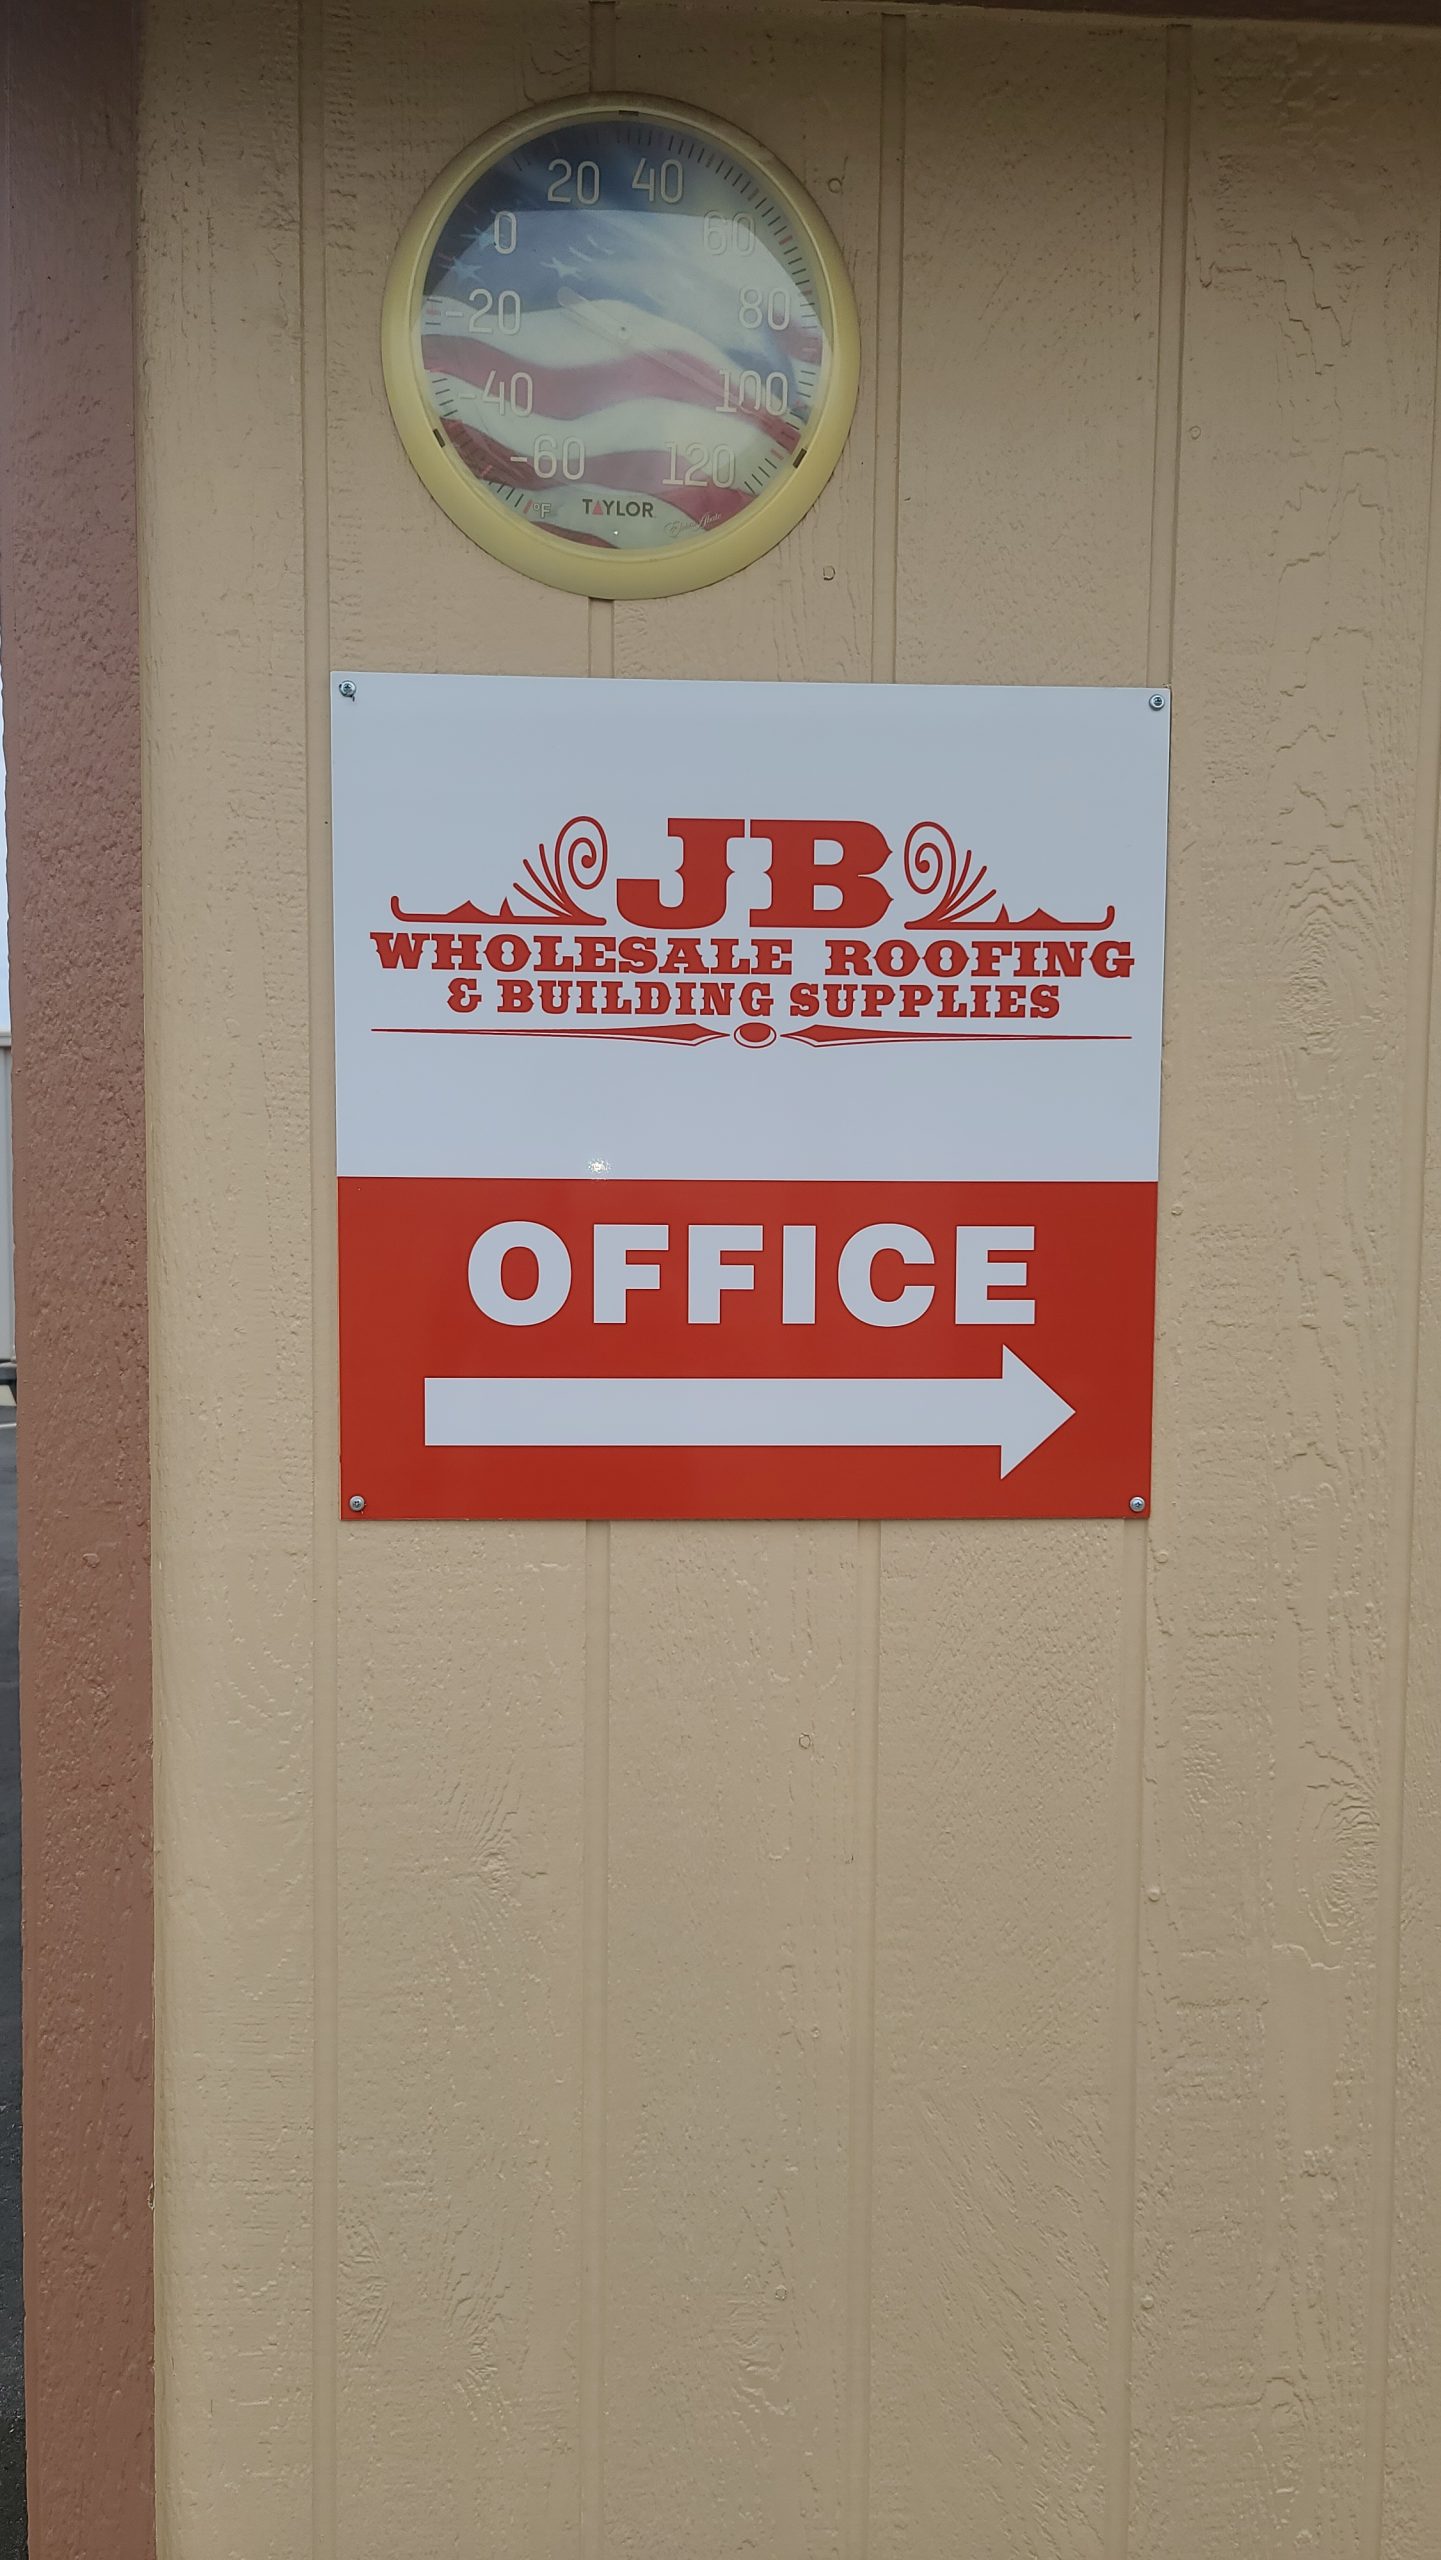 This outdoor directional sign for JB Wholesale Roofing's Murrieta location shows the way to their office, which is helpful for staff and visitors alike.